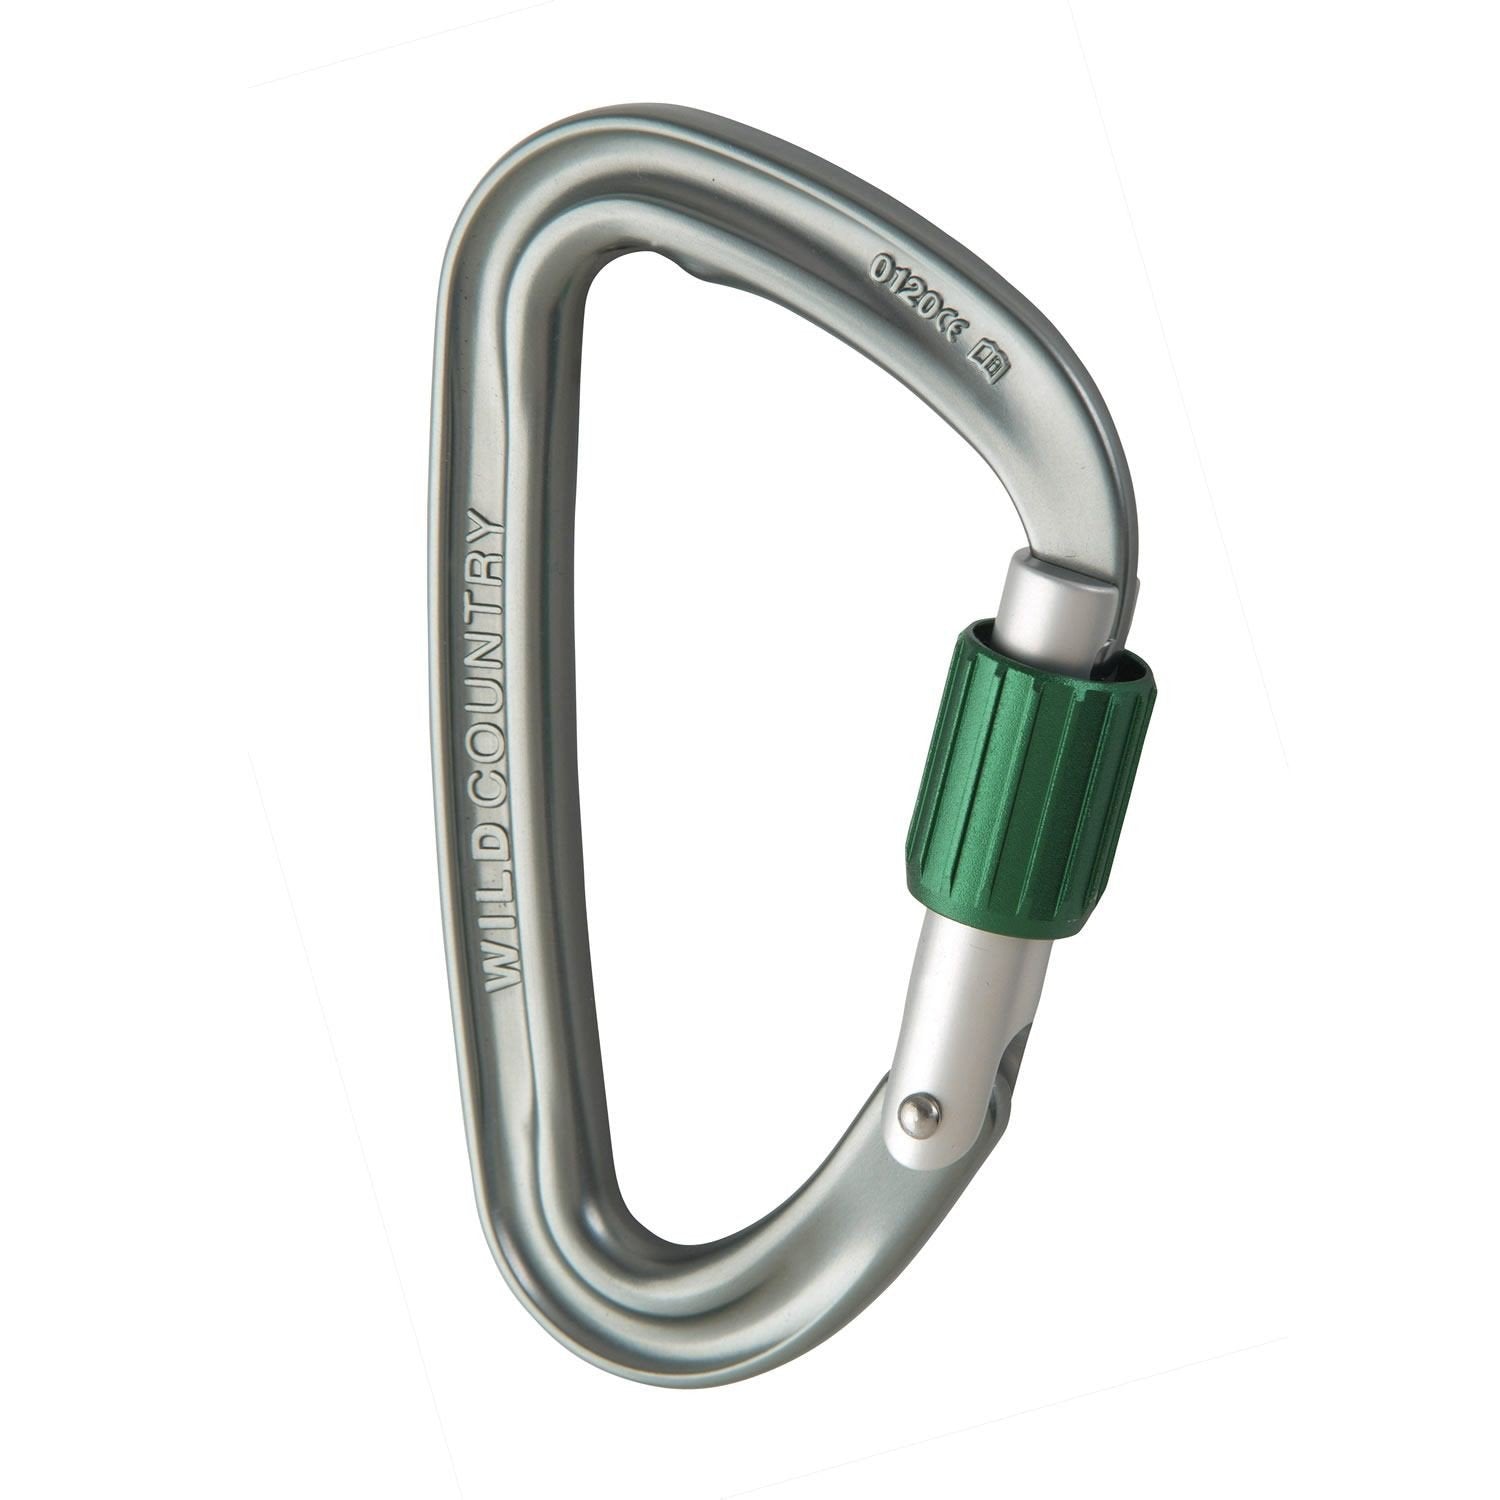 Wild Country Eos Screwgate climbing Carabiner, in silver colour with a green screwlock